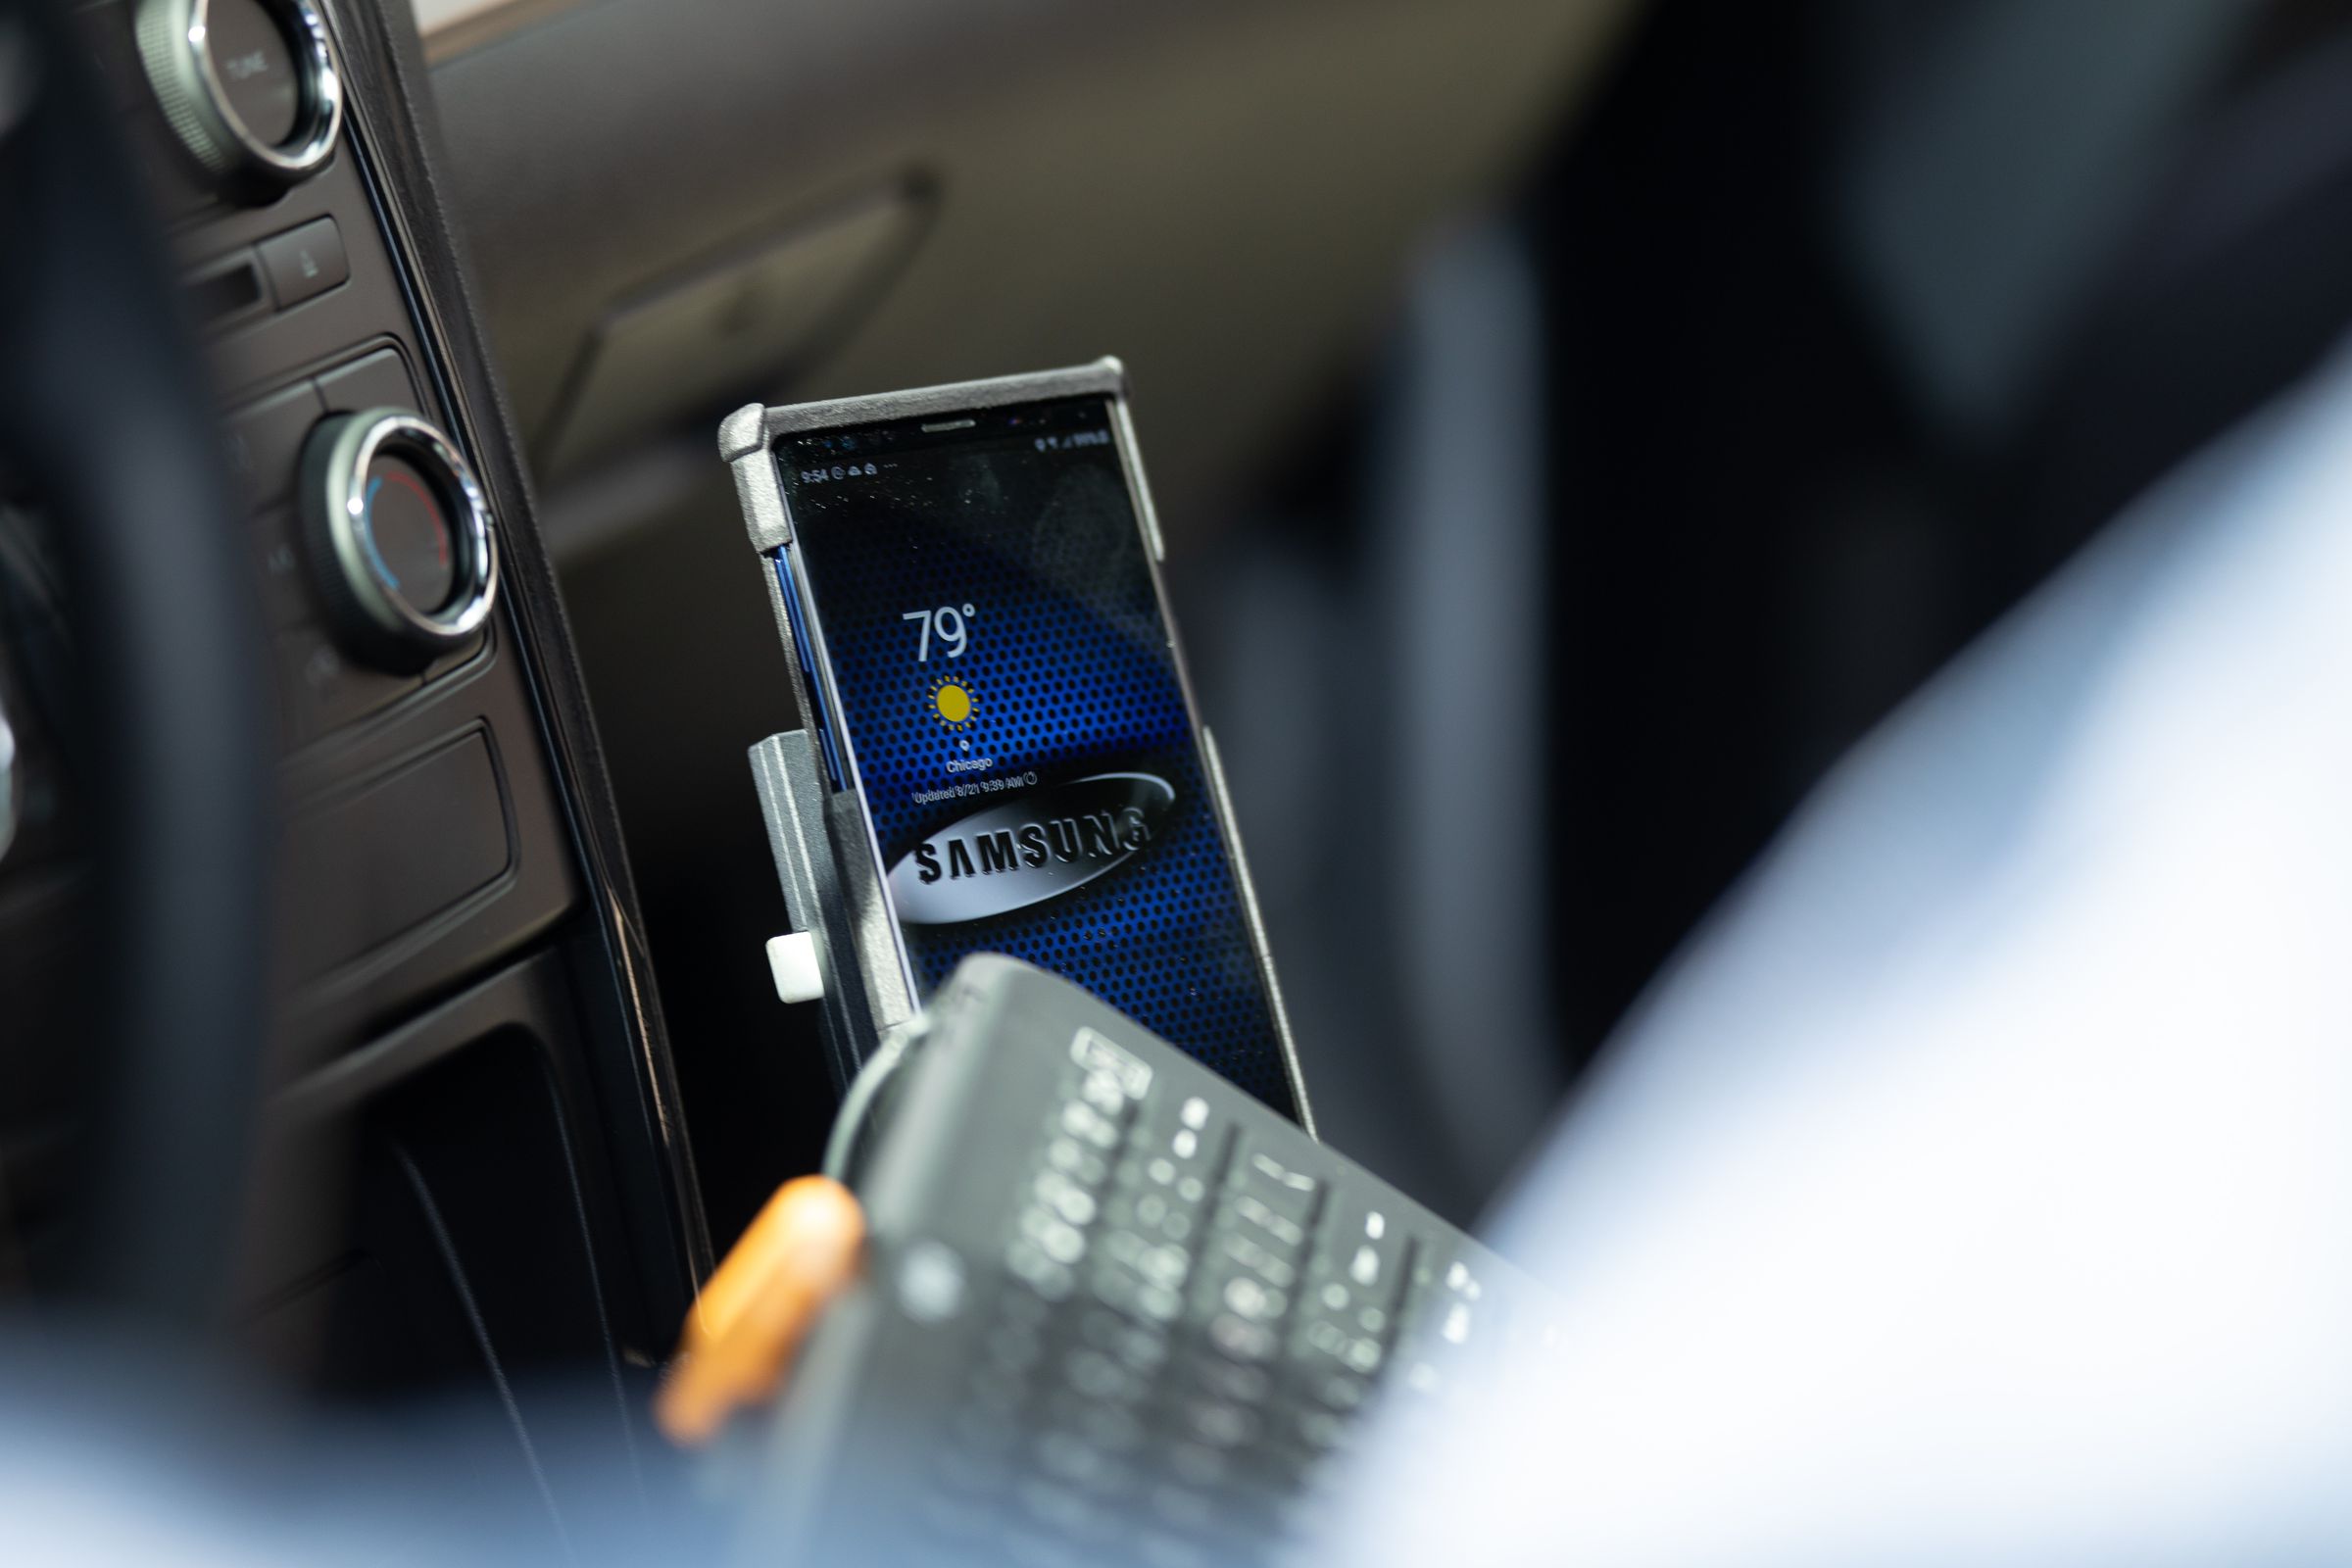 Police offers in one district will be given Samsung smartphones which can be docked in their cars.